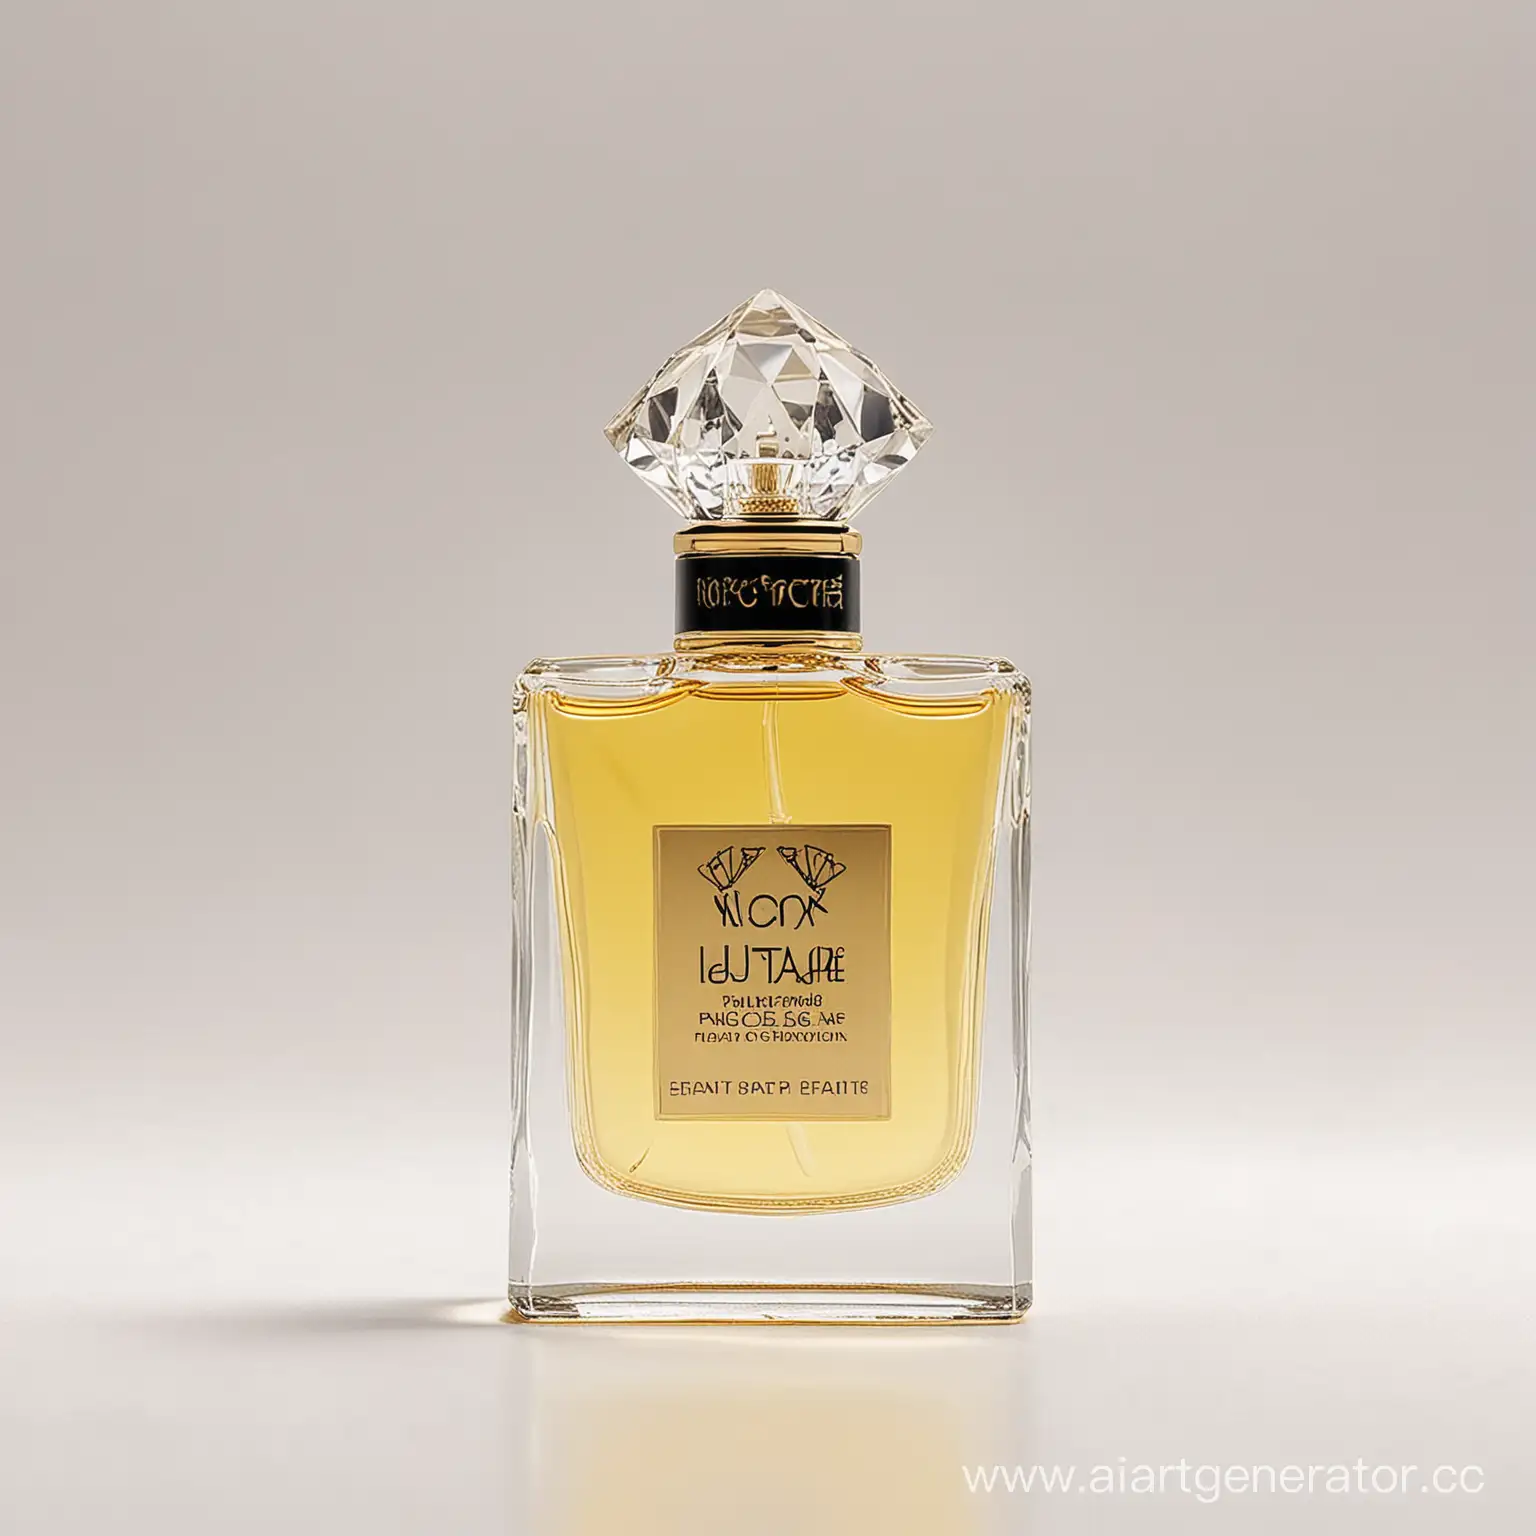 perfume on a white background. The perfume is square, the liquid inside is soft yellow, like champagne. The lid of the perfume looks like a diamond. on the perfume, on the label the name is 'Nox Flair Venice' and the logo with name 'jesaint parfait'